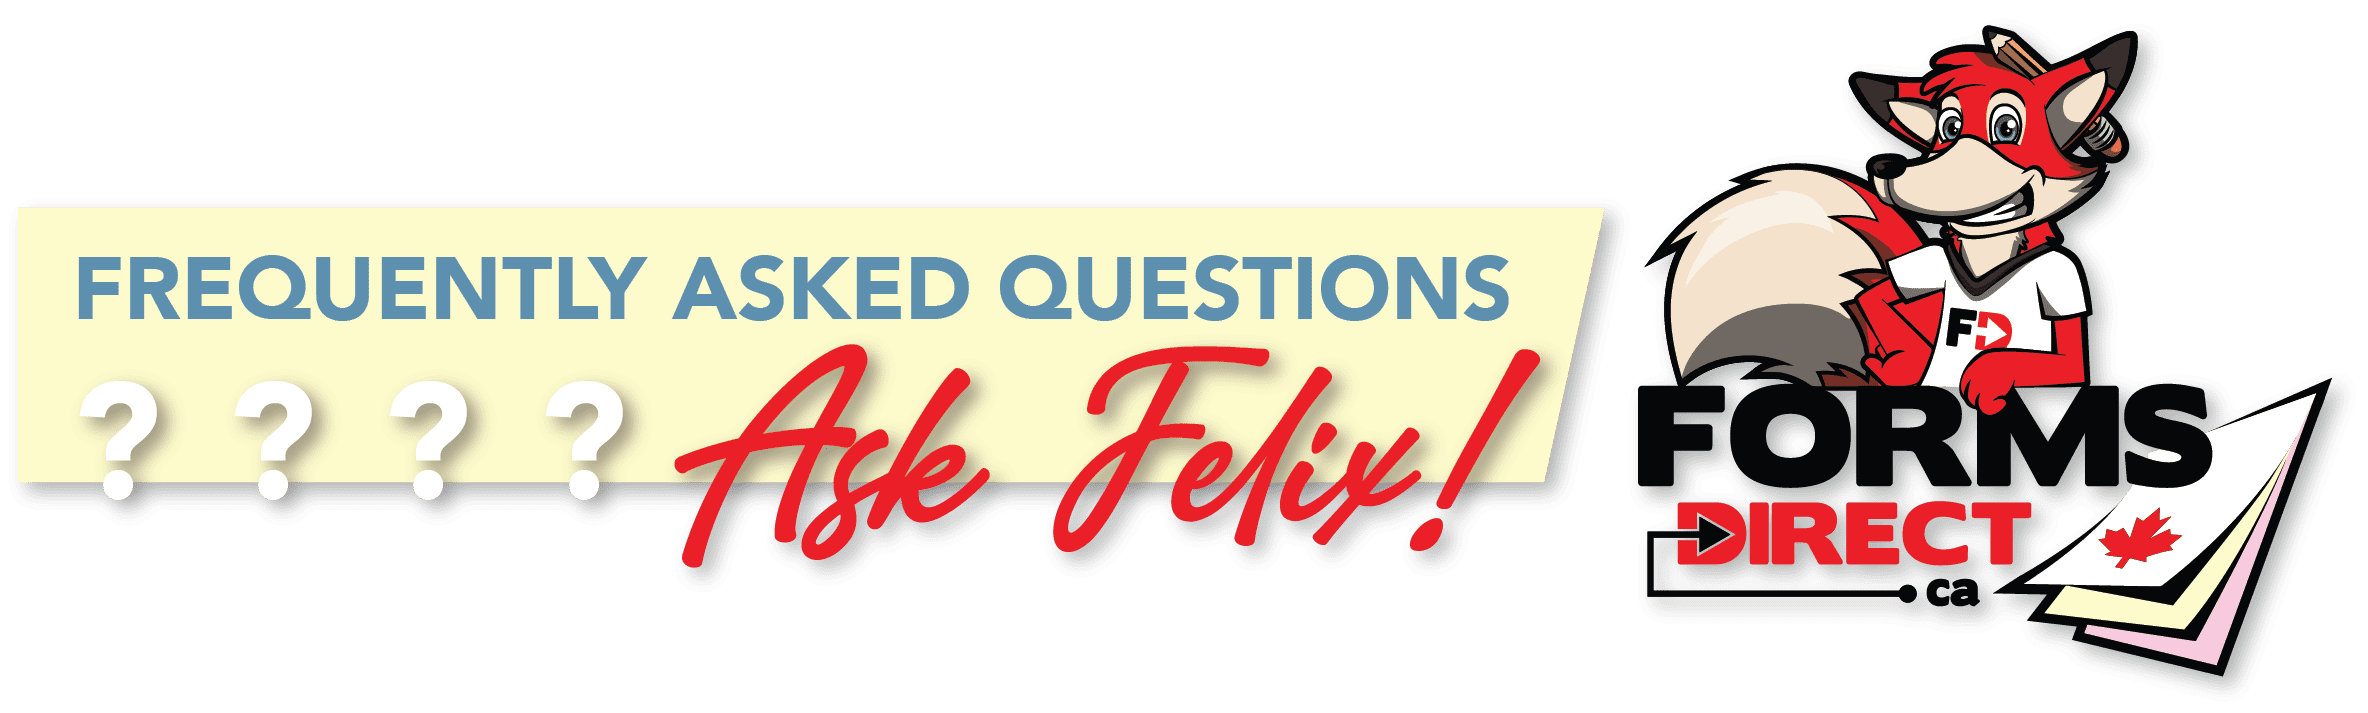 forms direct faq frequently asked questions